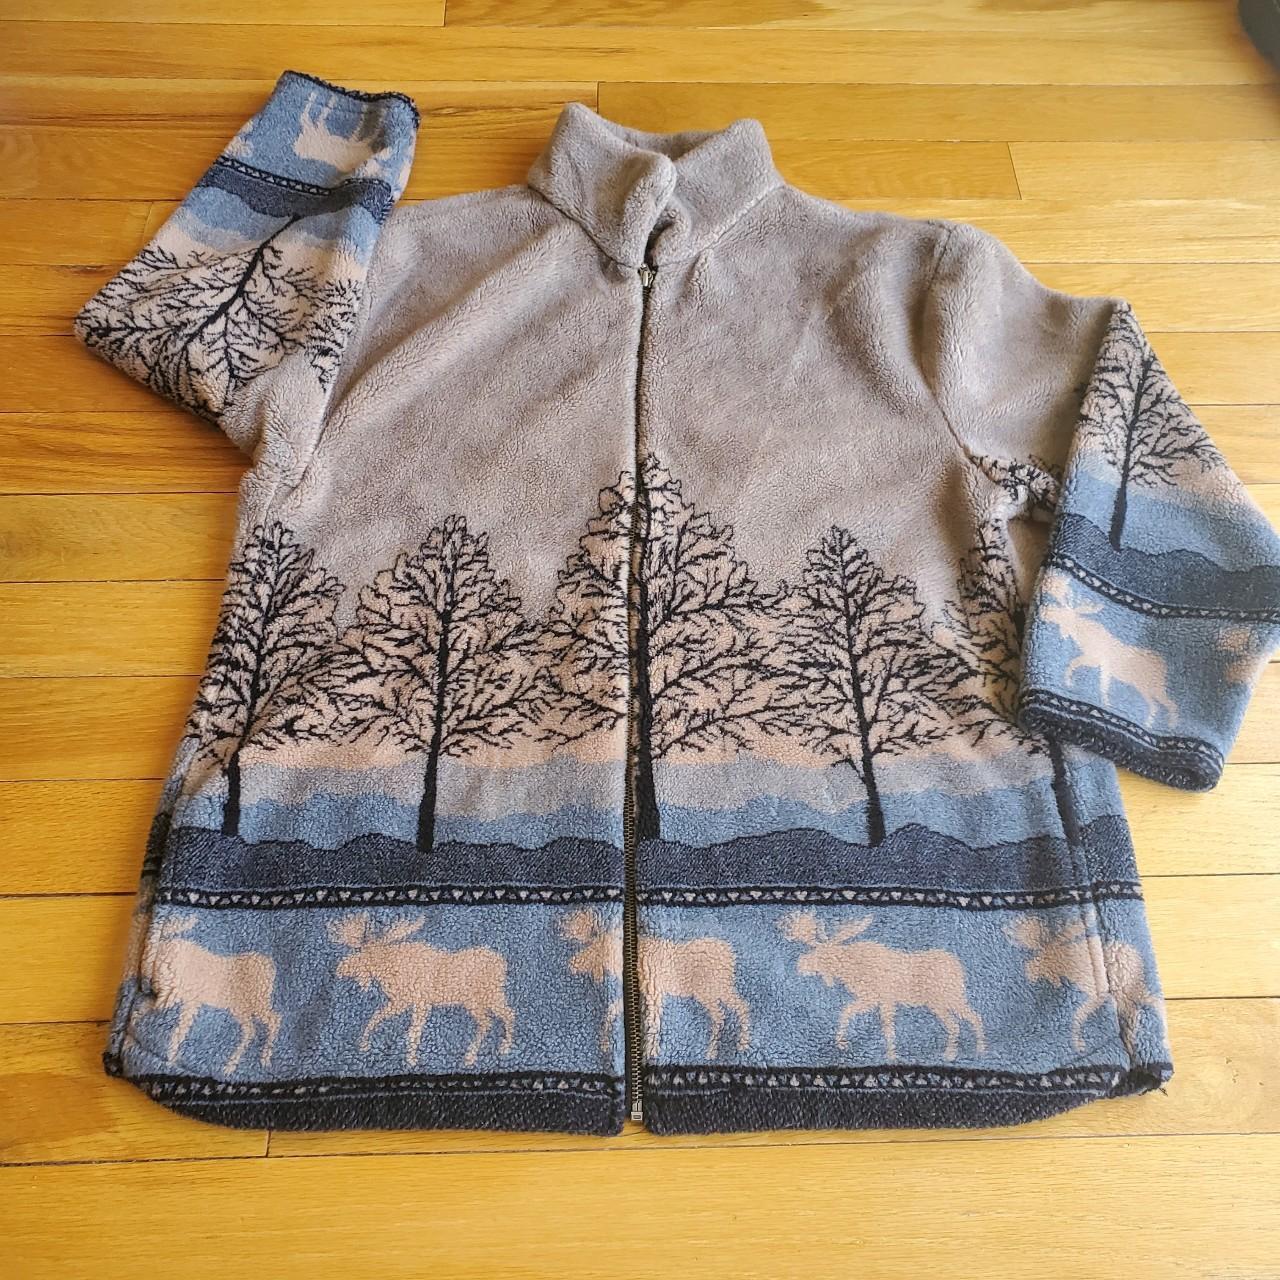 item listed by thriftedfitmn